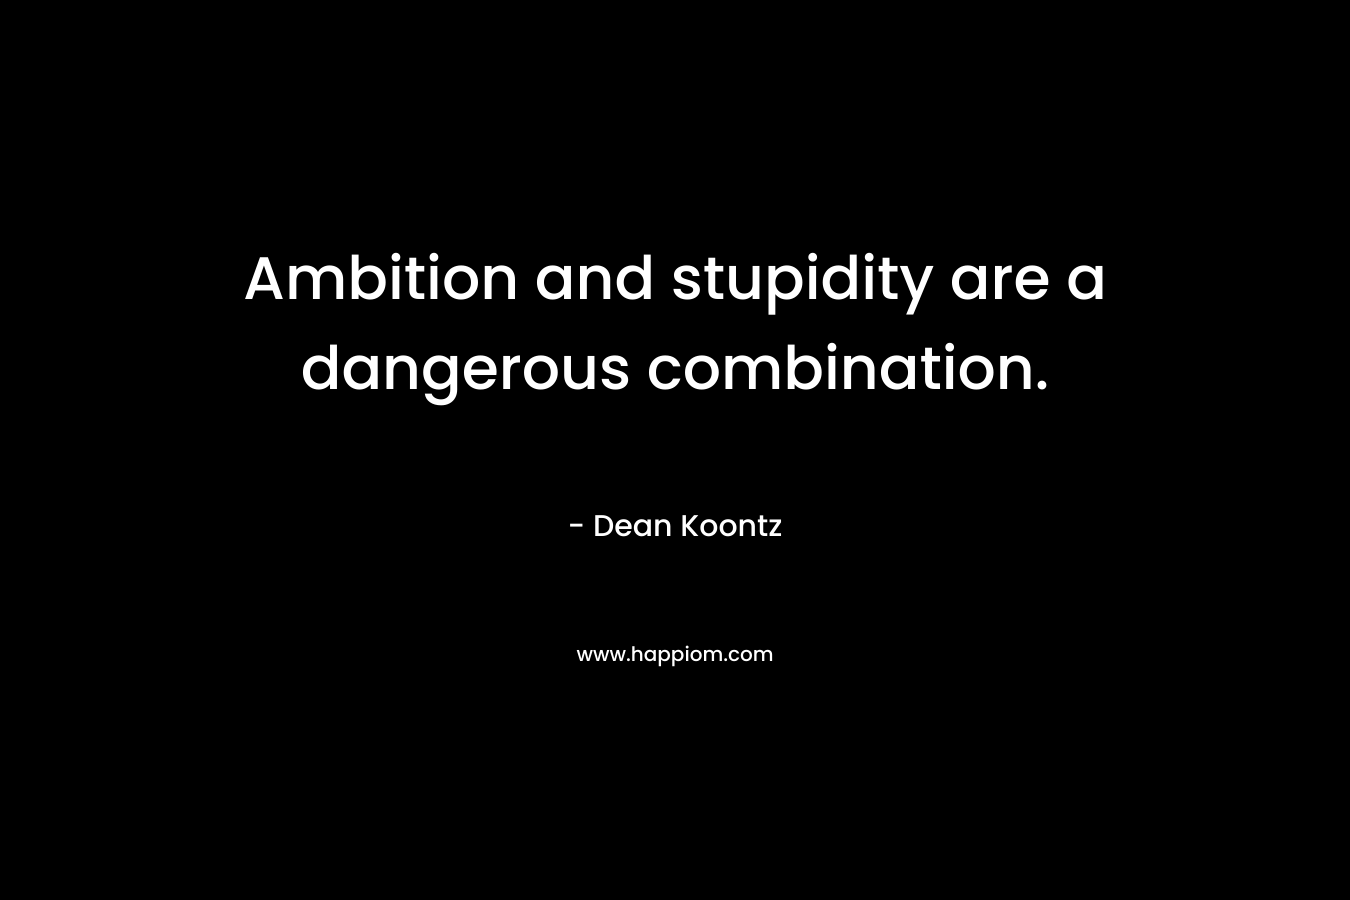 Ambition and stupidity are a dangerous combination. – Dean Koontz